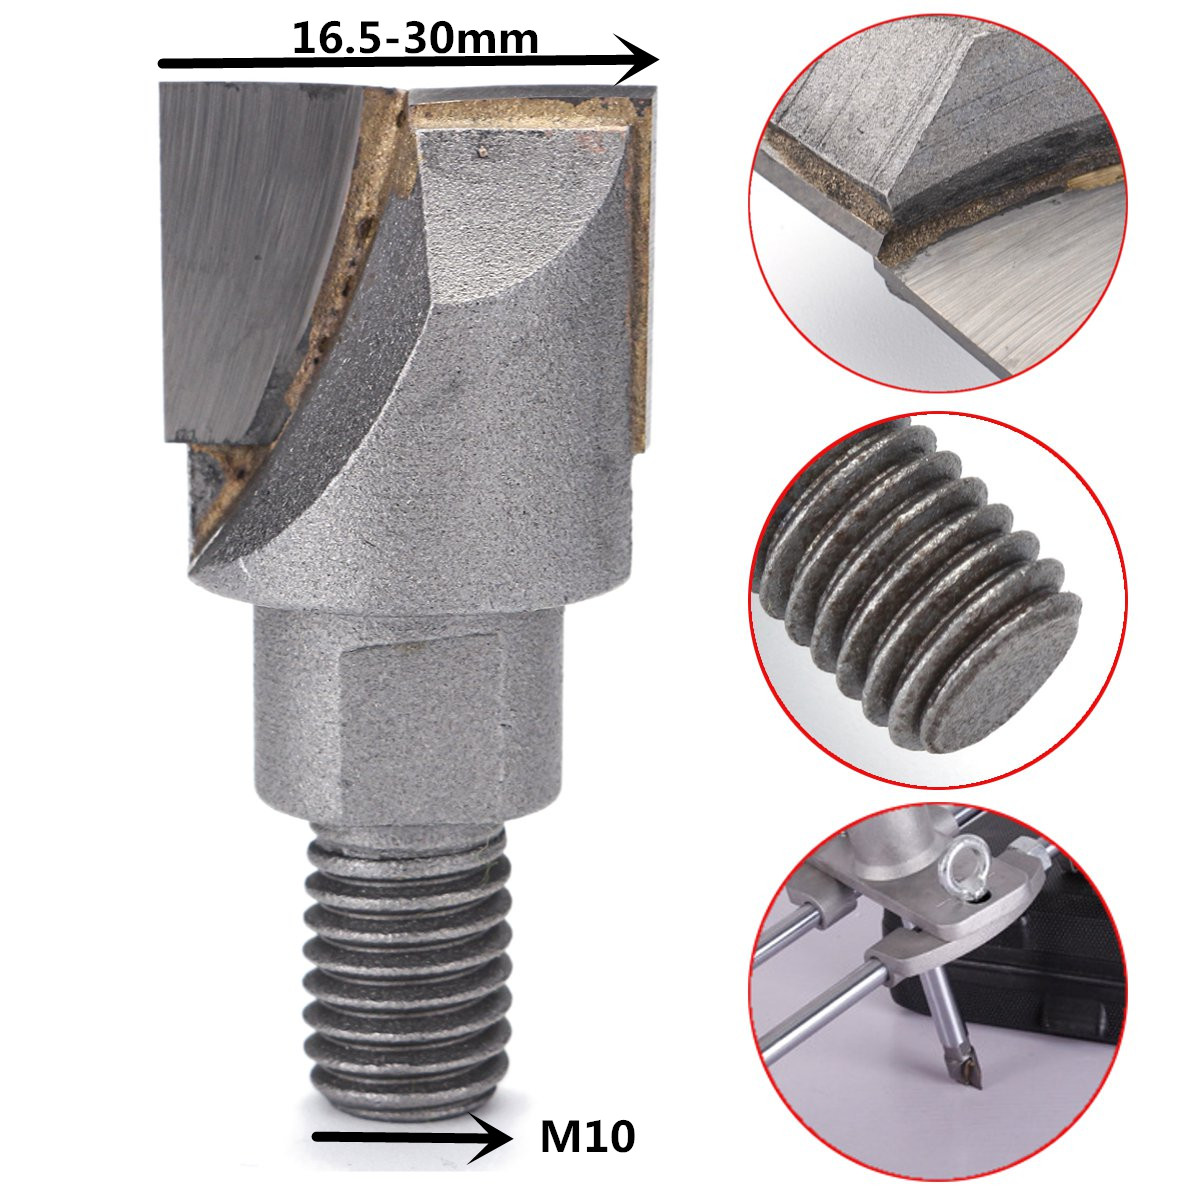 Drillpro-M10-165-30mm-Carbide-Soubers-Plunging-Cutter-Wood-Cutter-for-Soubers-Mortice-Lock-Fitting-J-1595958-1